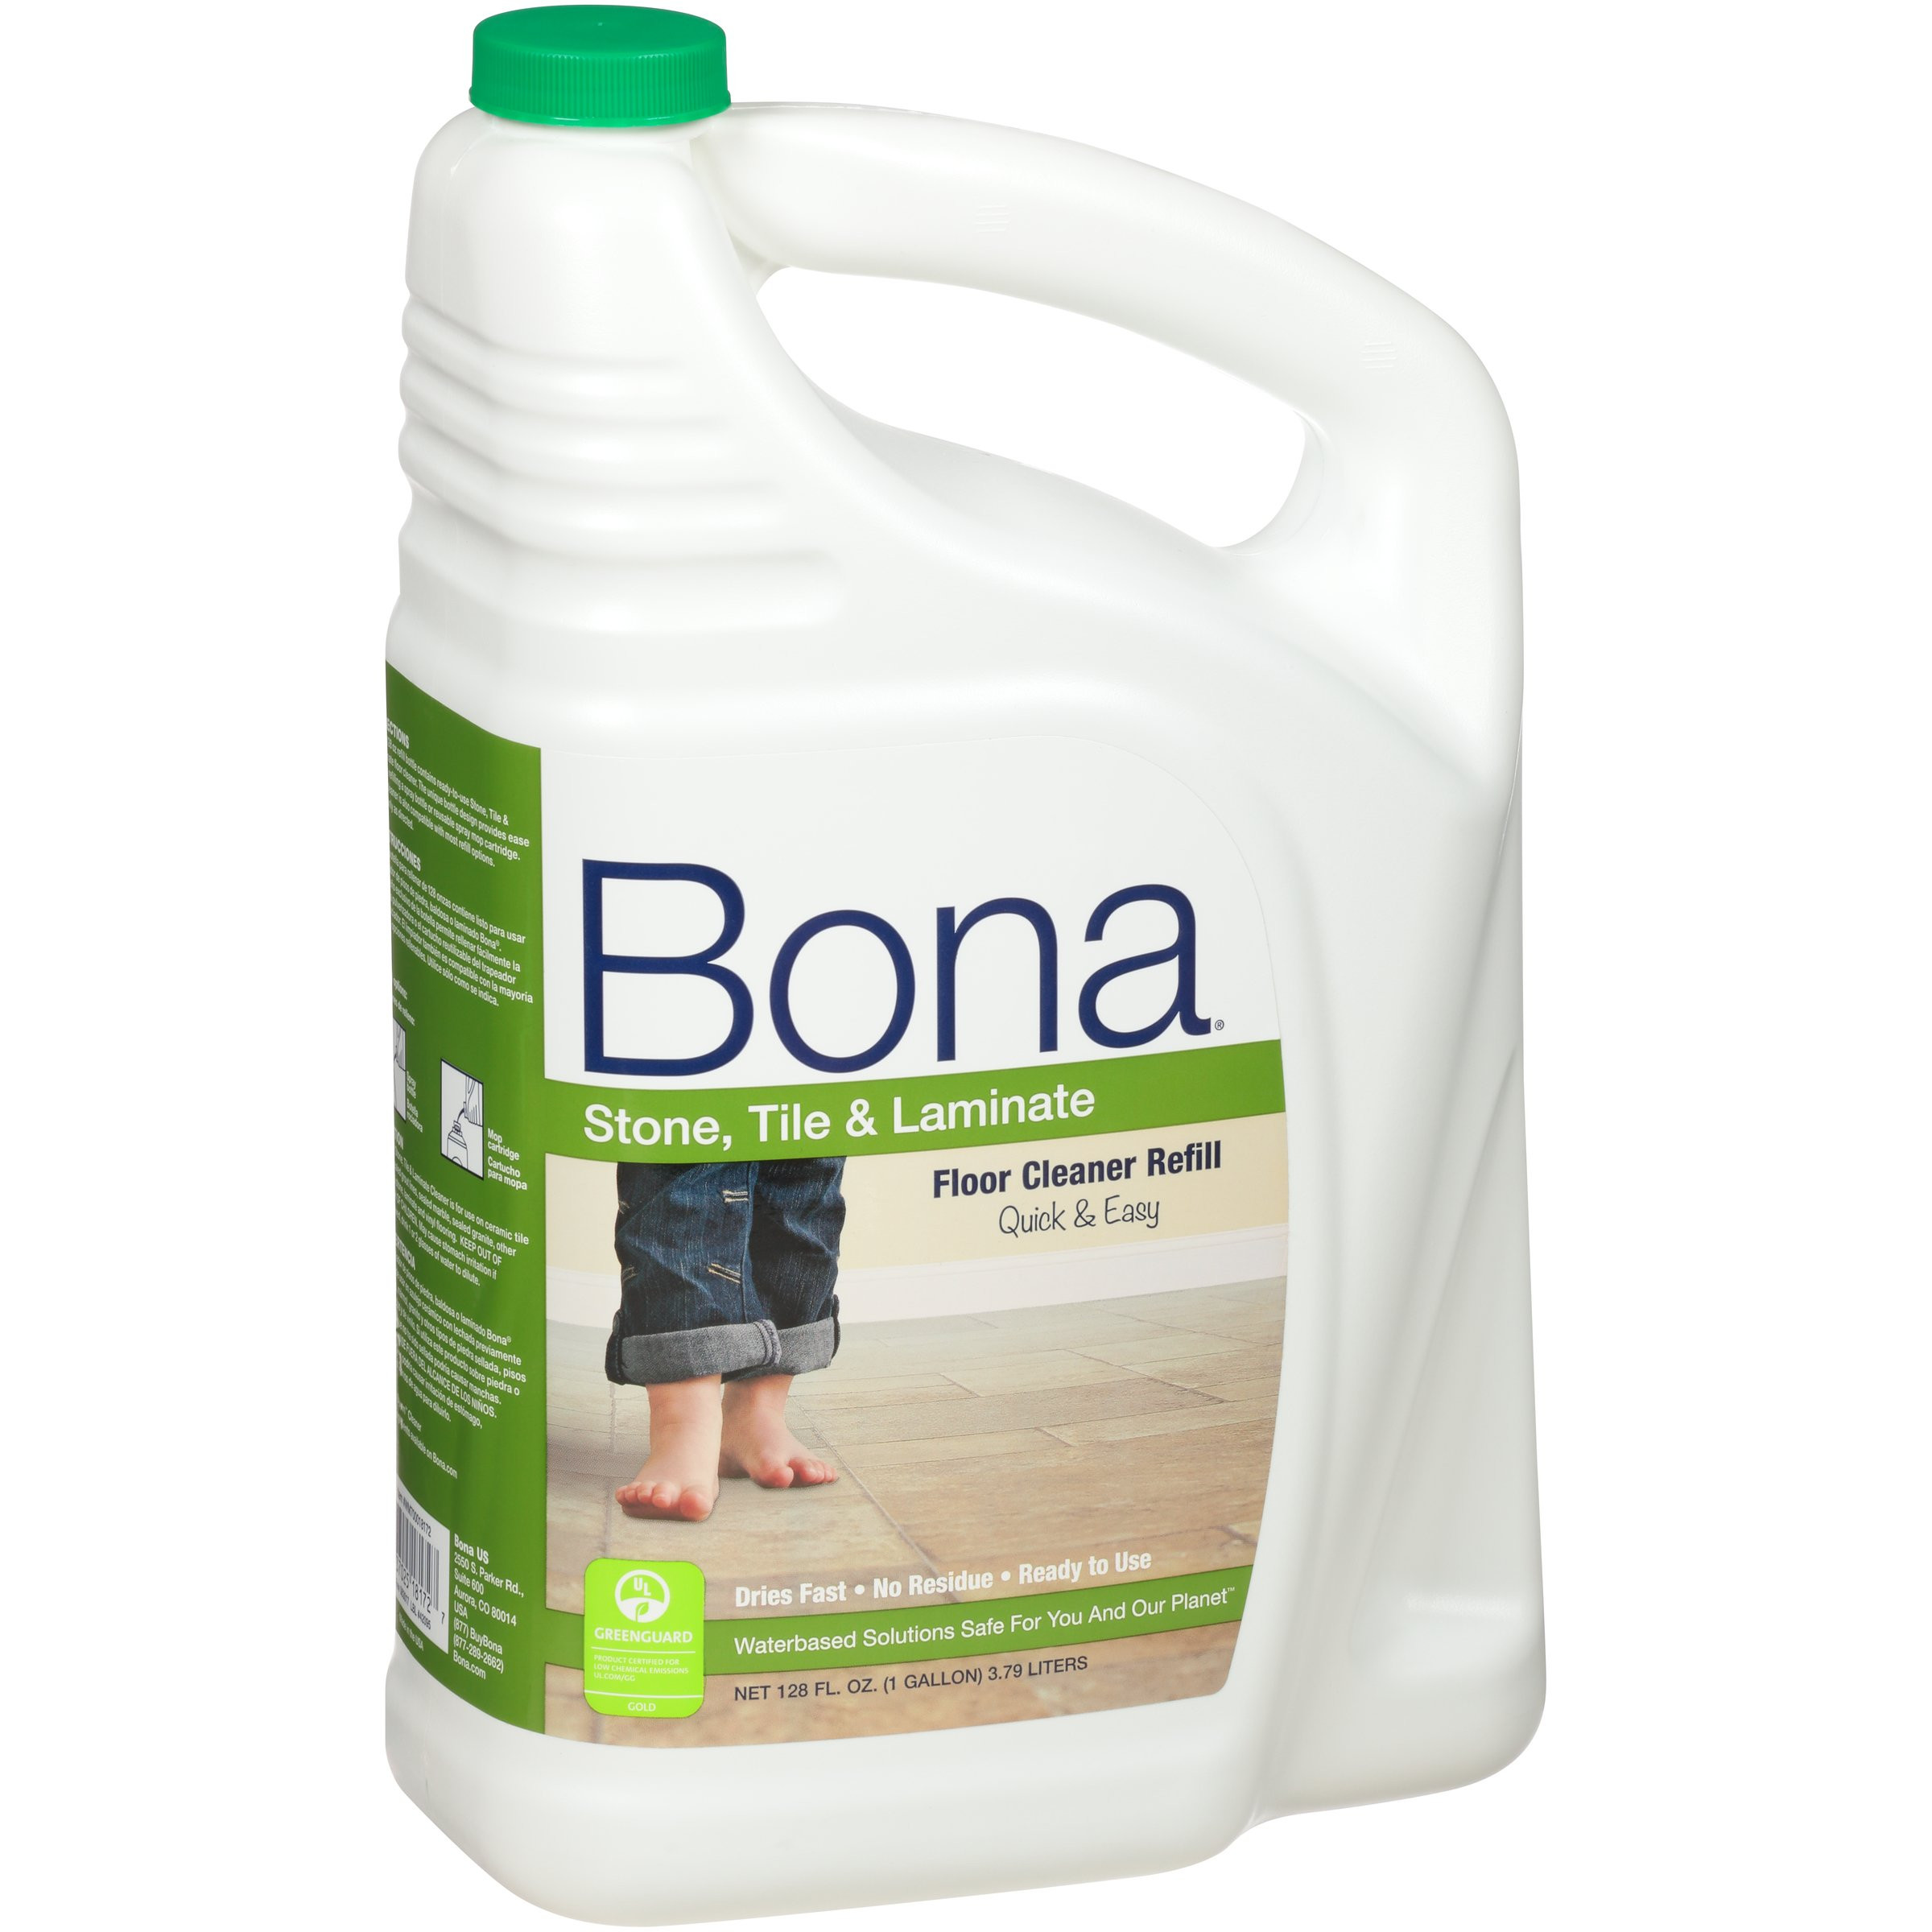 19 Recommended Bona Hardwood Floor Cleaner 128 Oz 2024 free download bona hardwood floor cleaner 128 oz of amazon com bona wm700018182 free simple hardwood floor cleaner with bonaa stone tile laminate floor cleaner refill 128oz pack may vary